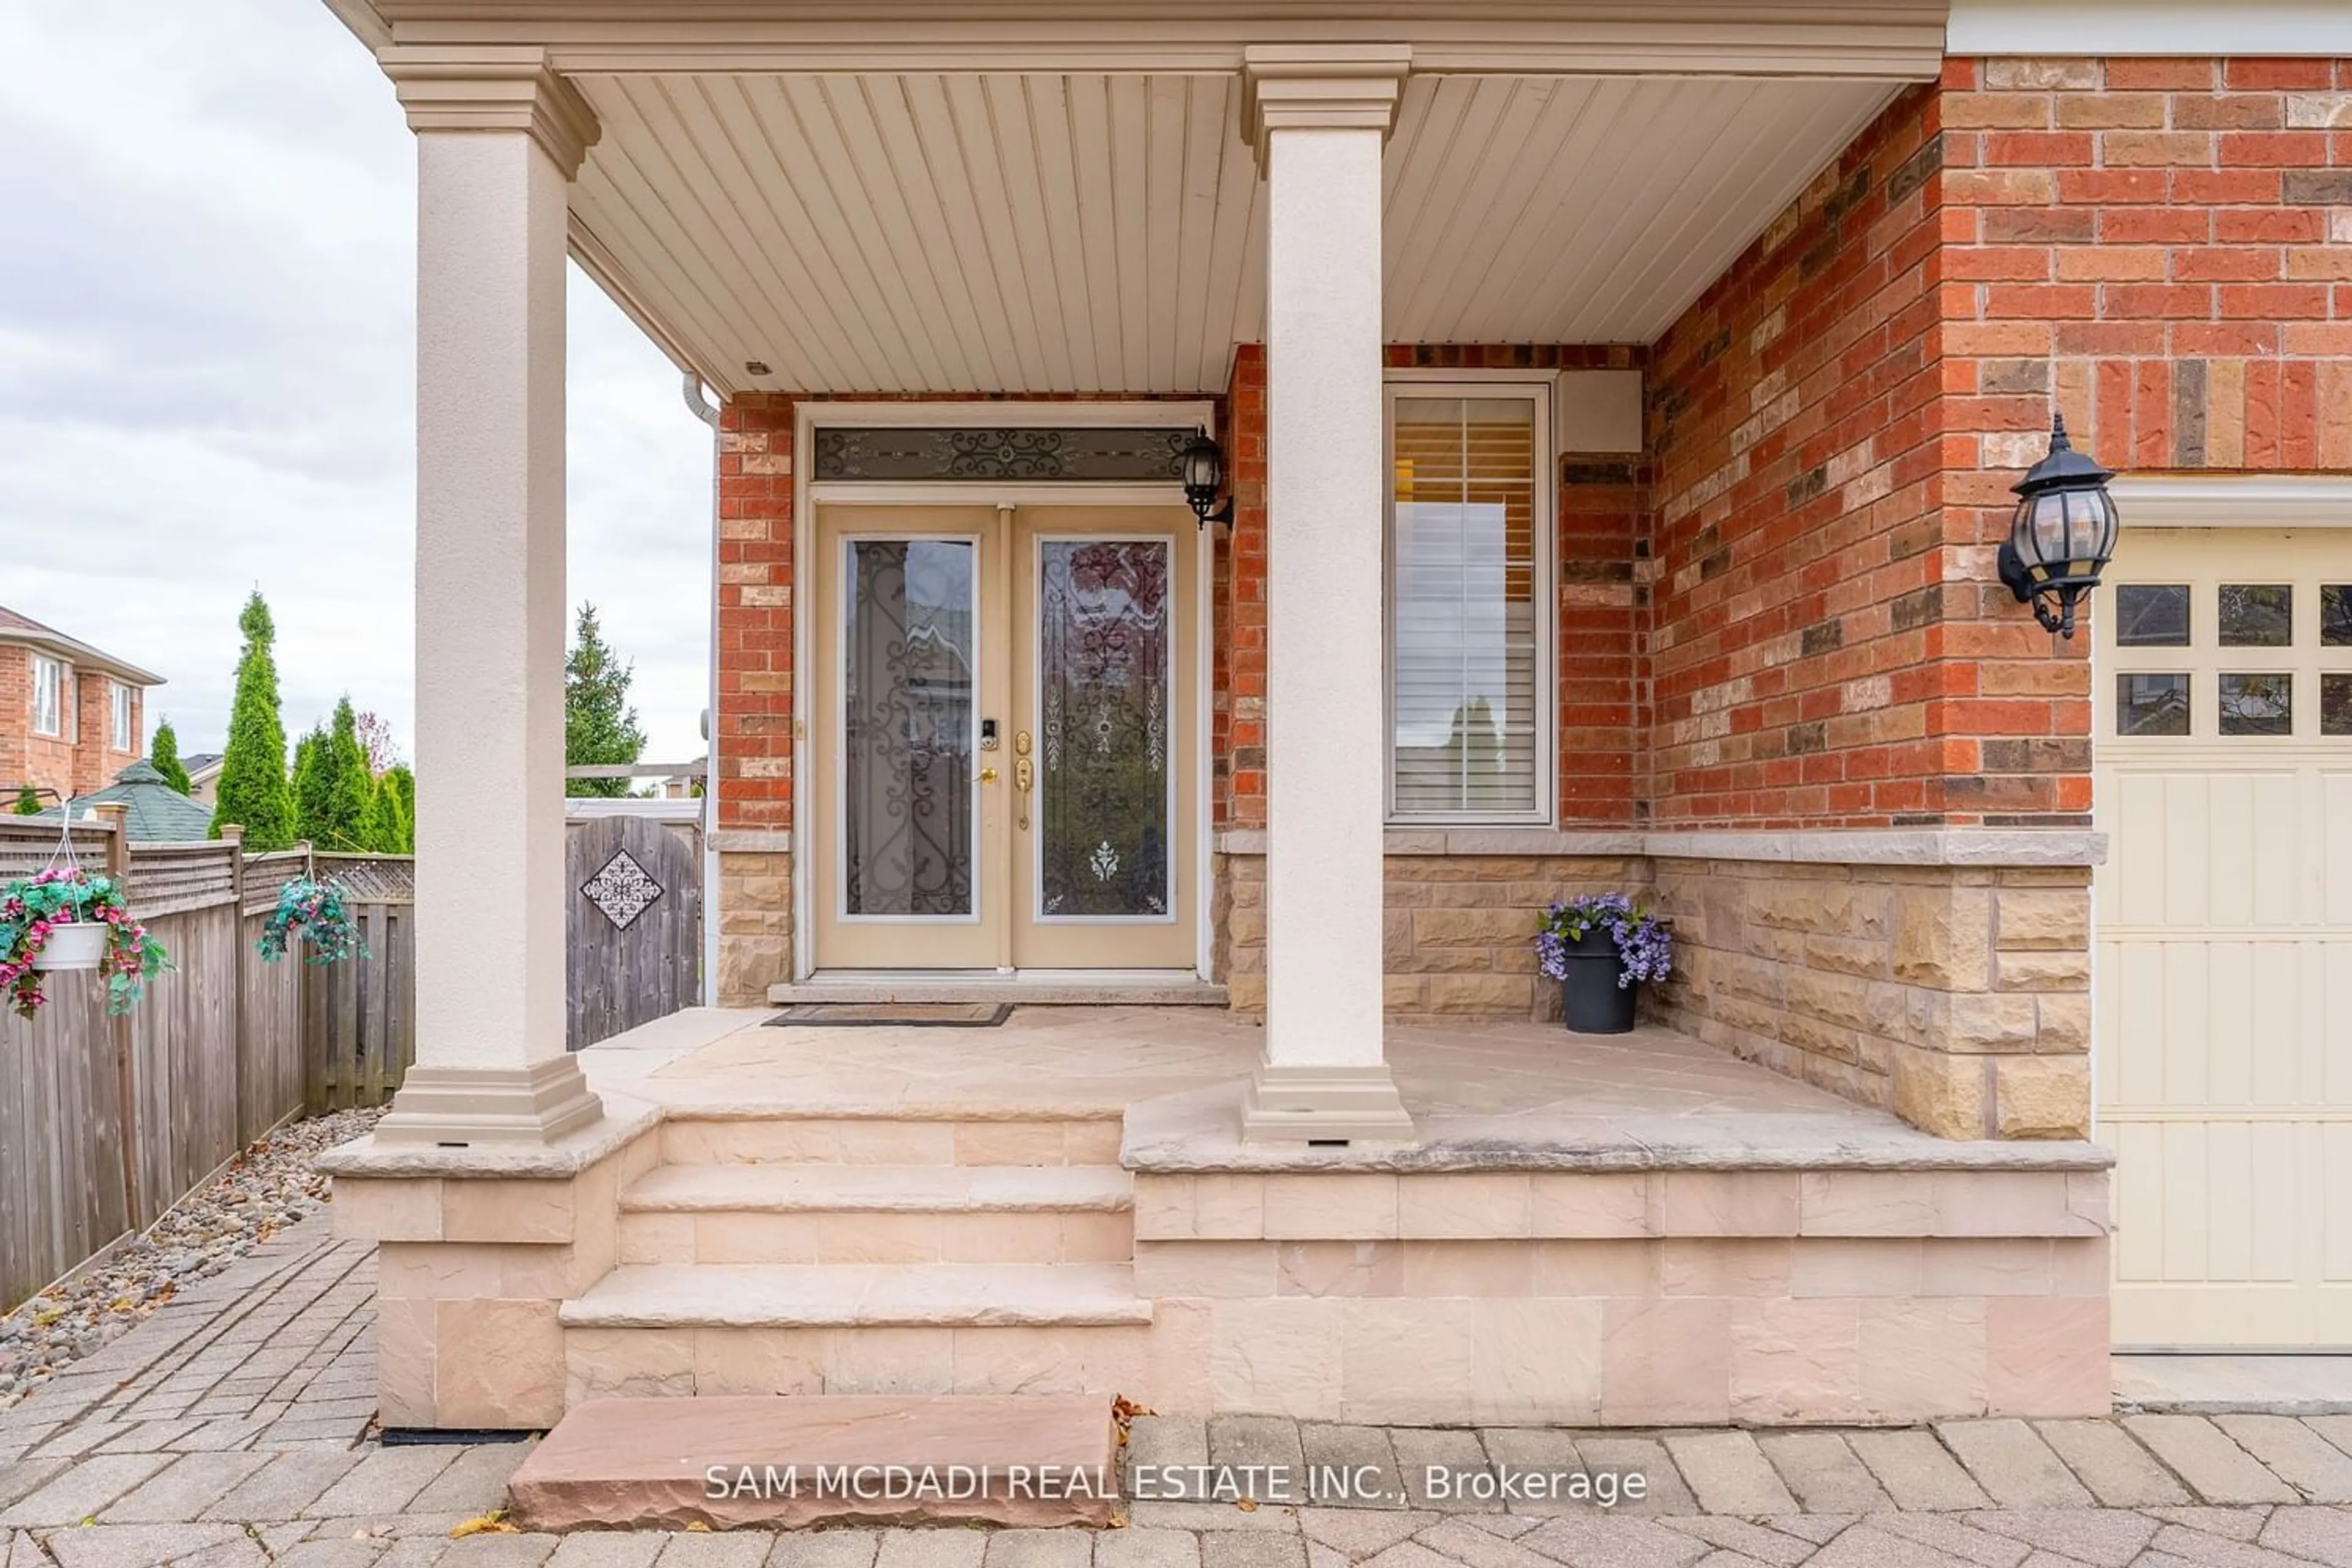 Home with brick exterior material for 3852 Rosanna Dr, Mississauga Ontario L5M 7Y1